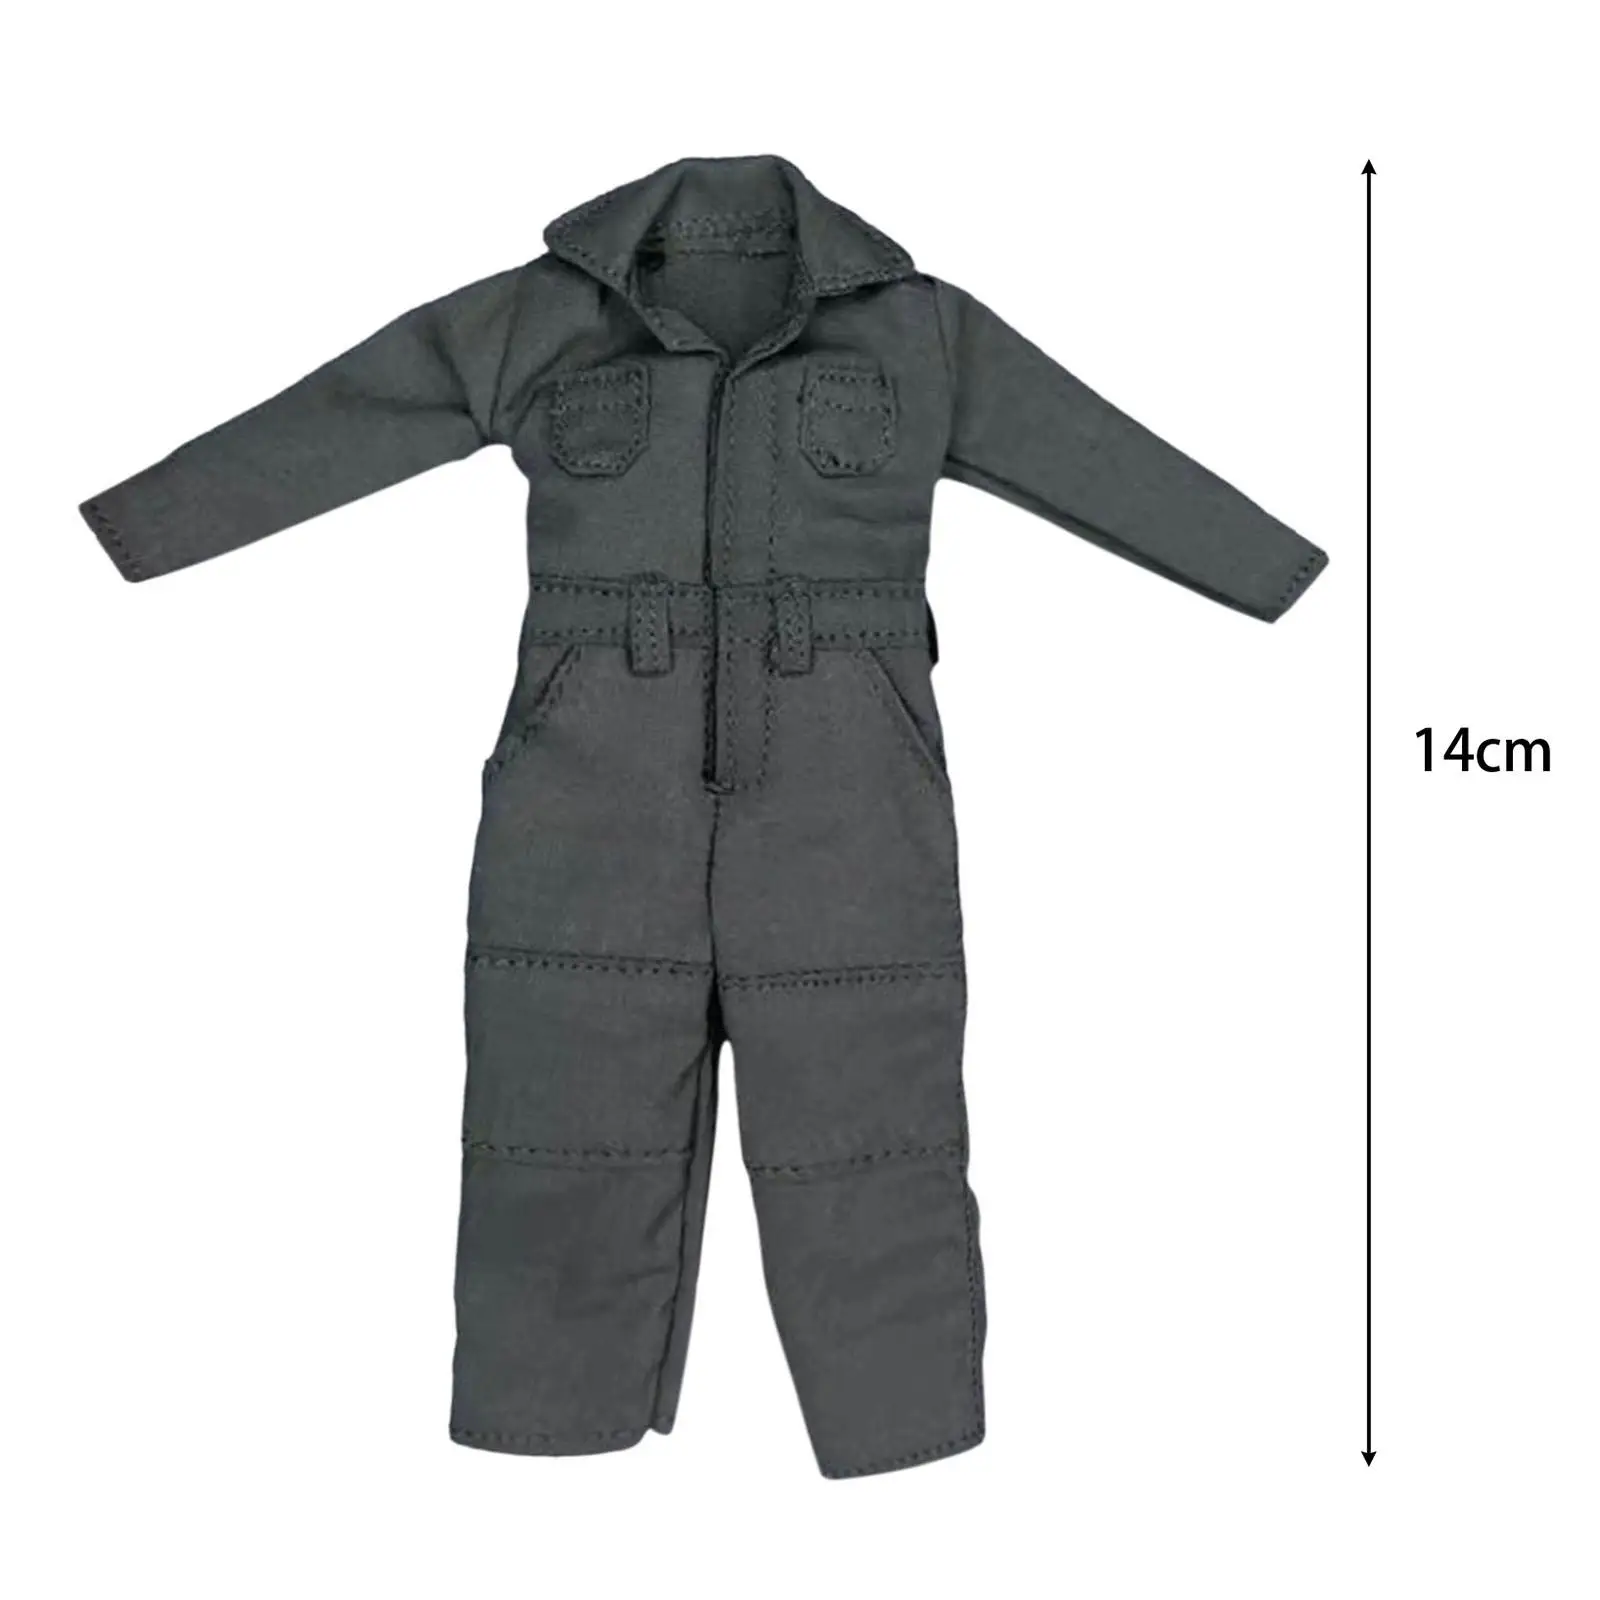 1/12 Scale Jumpsuit Handmade Action Figures Coveralls for Club Show Bedroom